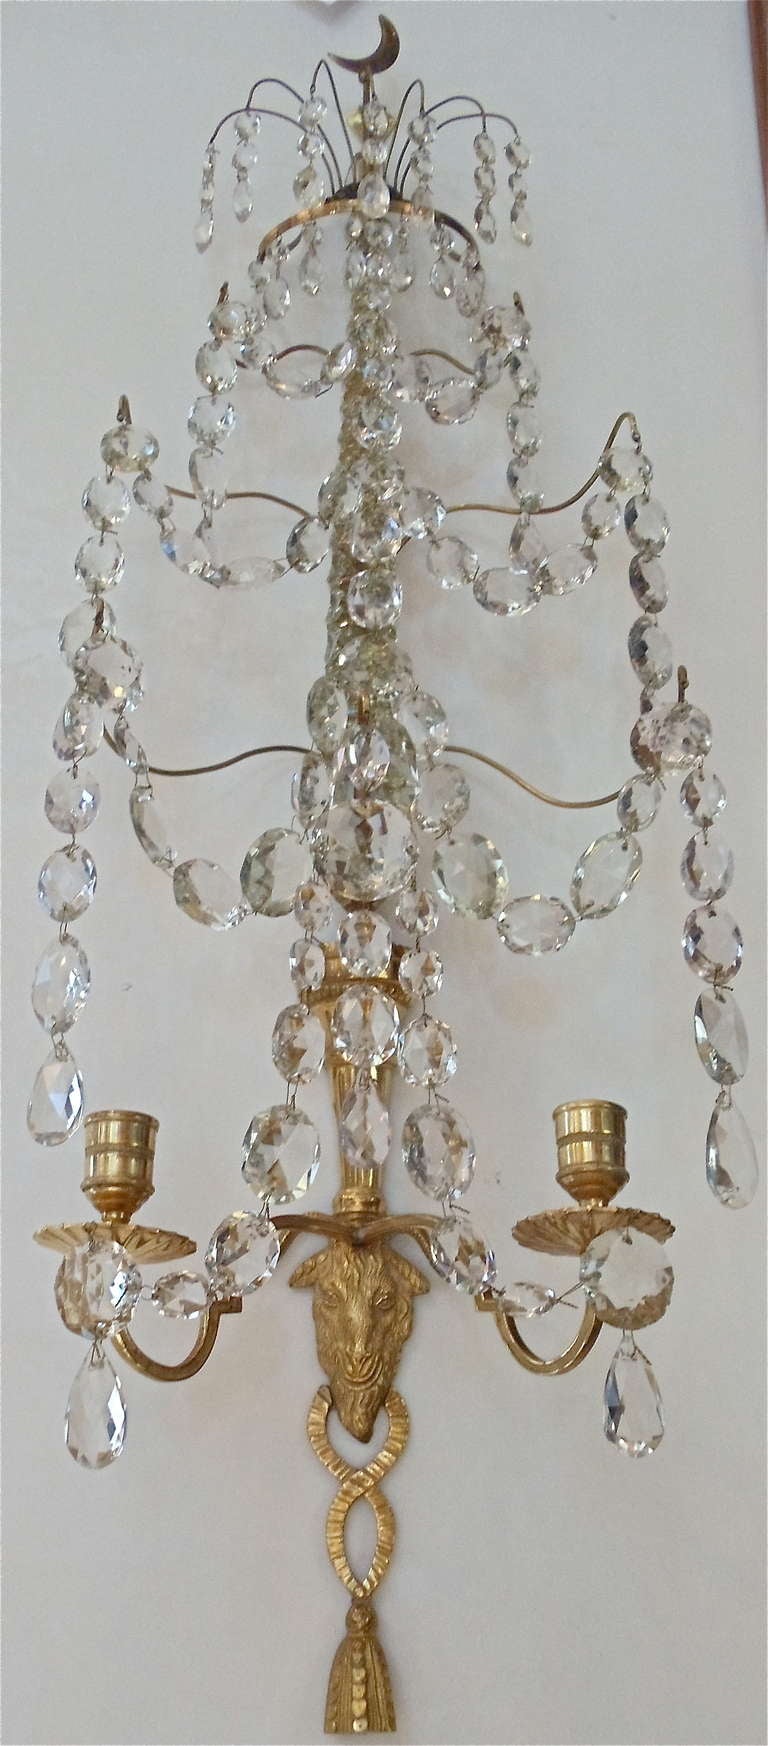 Pair of Late 18th Century Russian Neoclassical Ormolu and Cut Glass Sconces

--Each with a cut glass spire fitted with gilt bronze sprays linked by chains of faceted drops and suspending faceted pendants, the lower part with a ram's head flanked